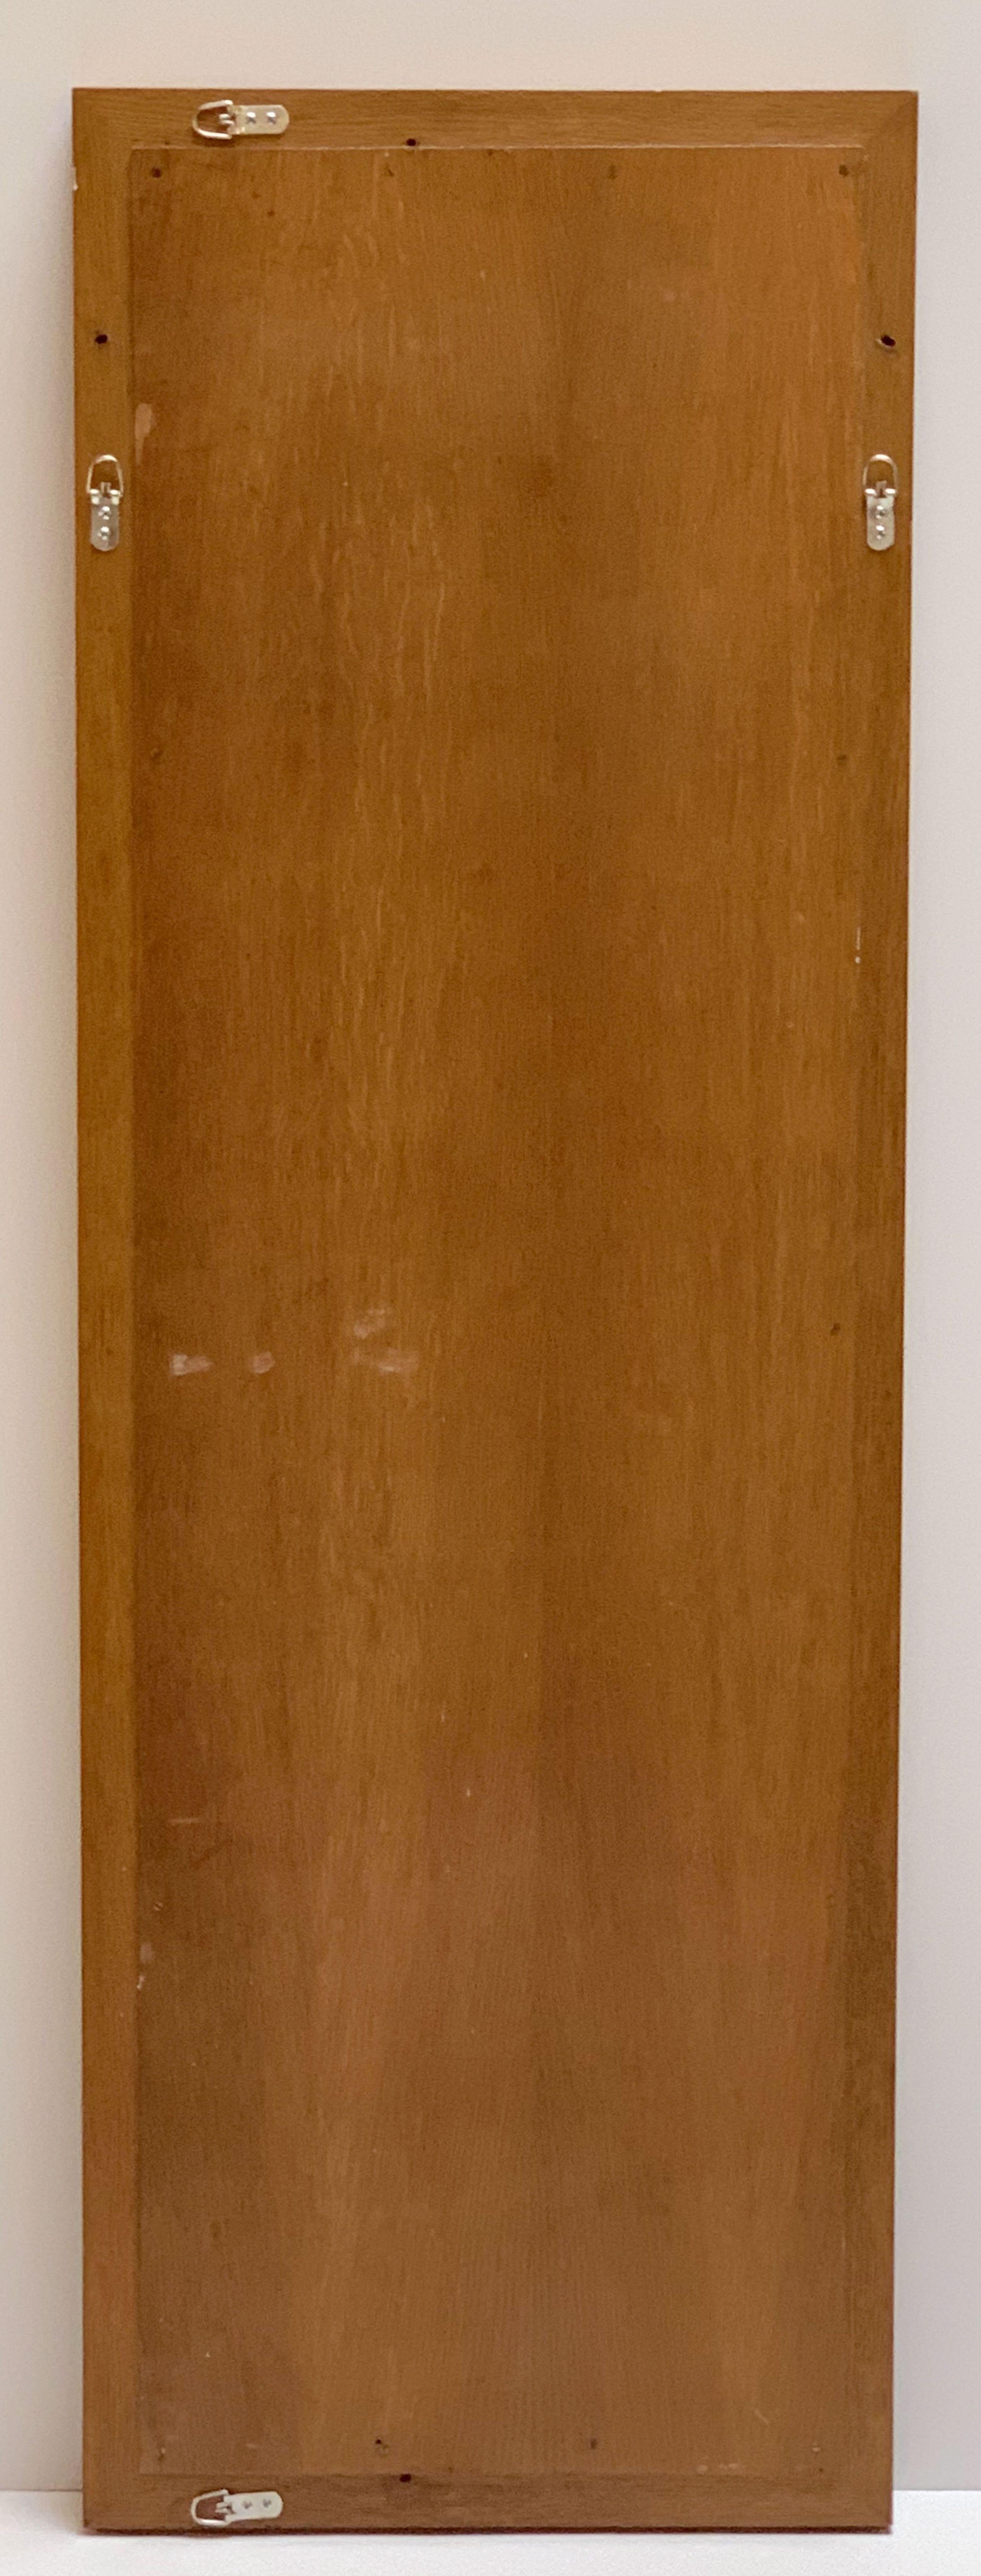 Art Deco Mirror with Beveled Frame of Copper-Colored Glass (H 58 3/4 x W 19 3/4) 9